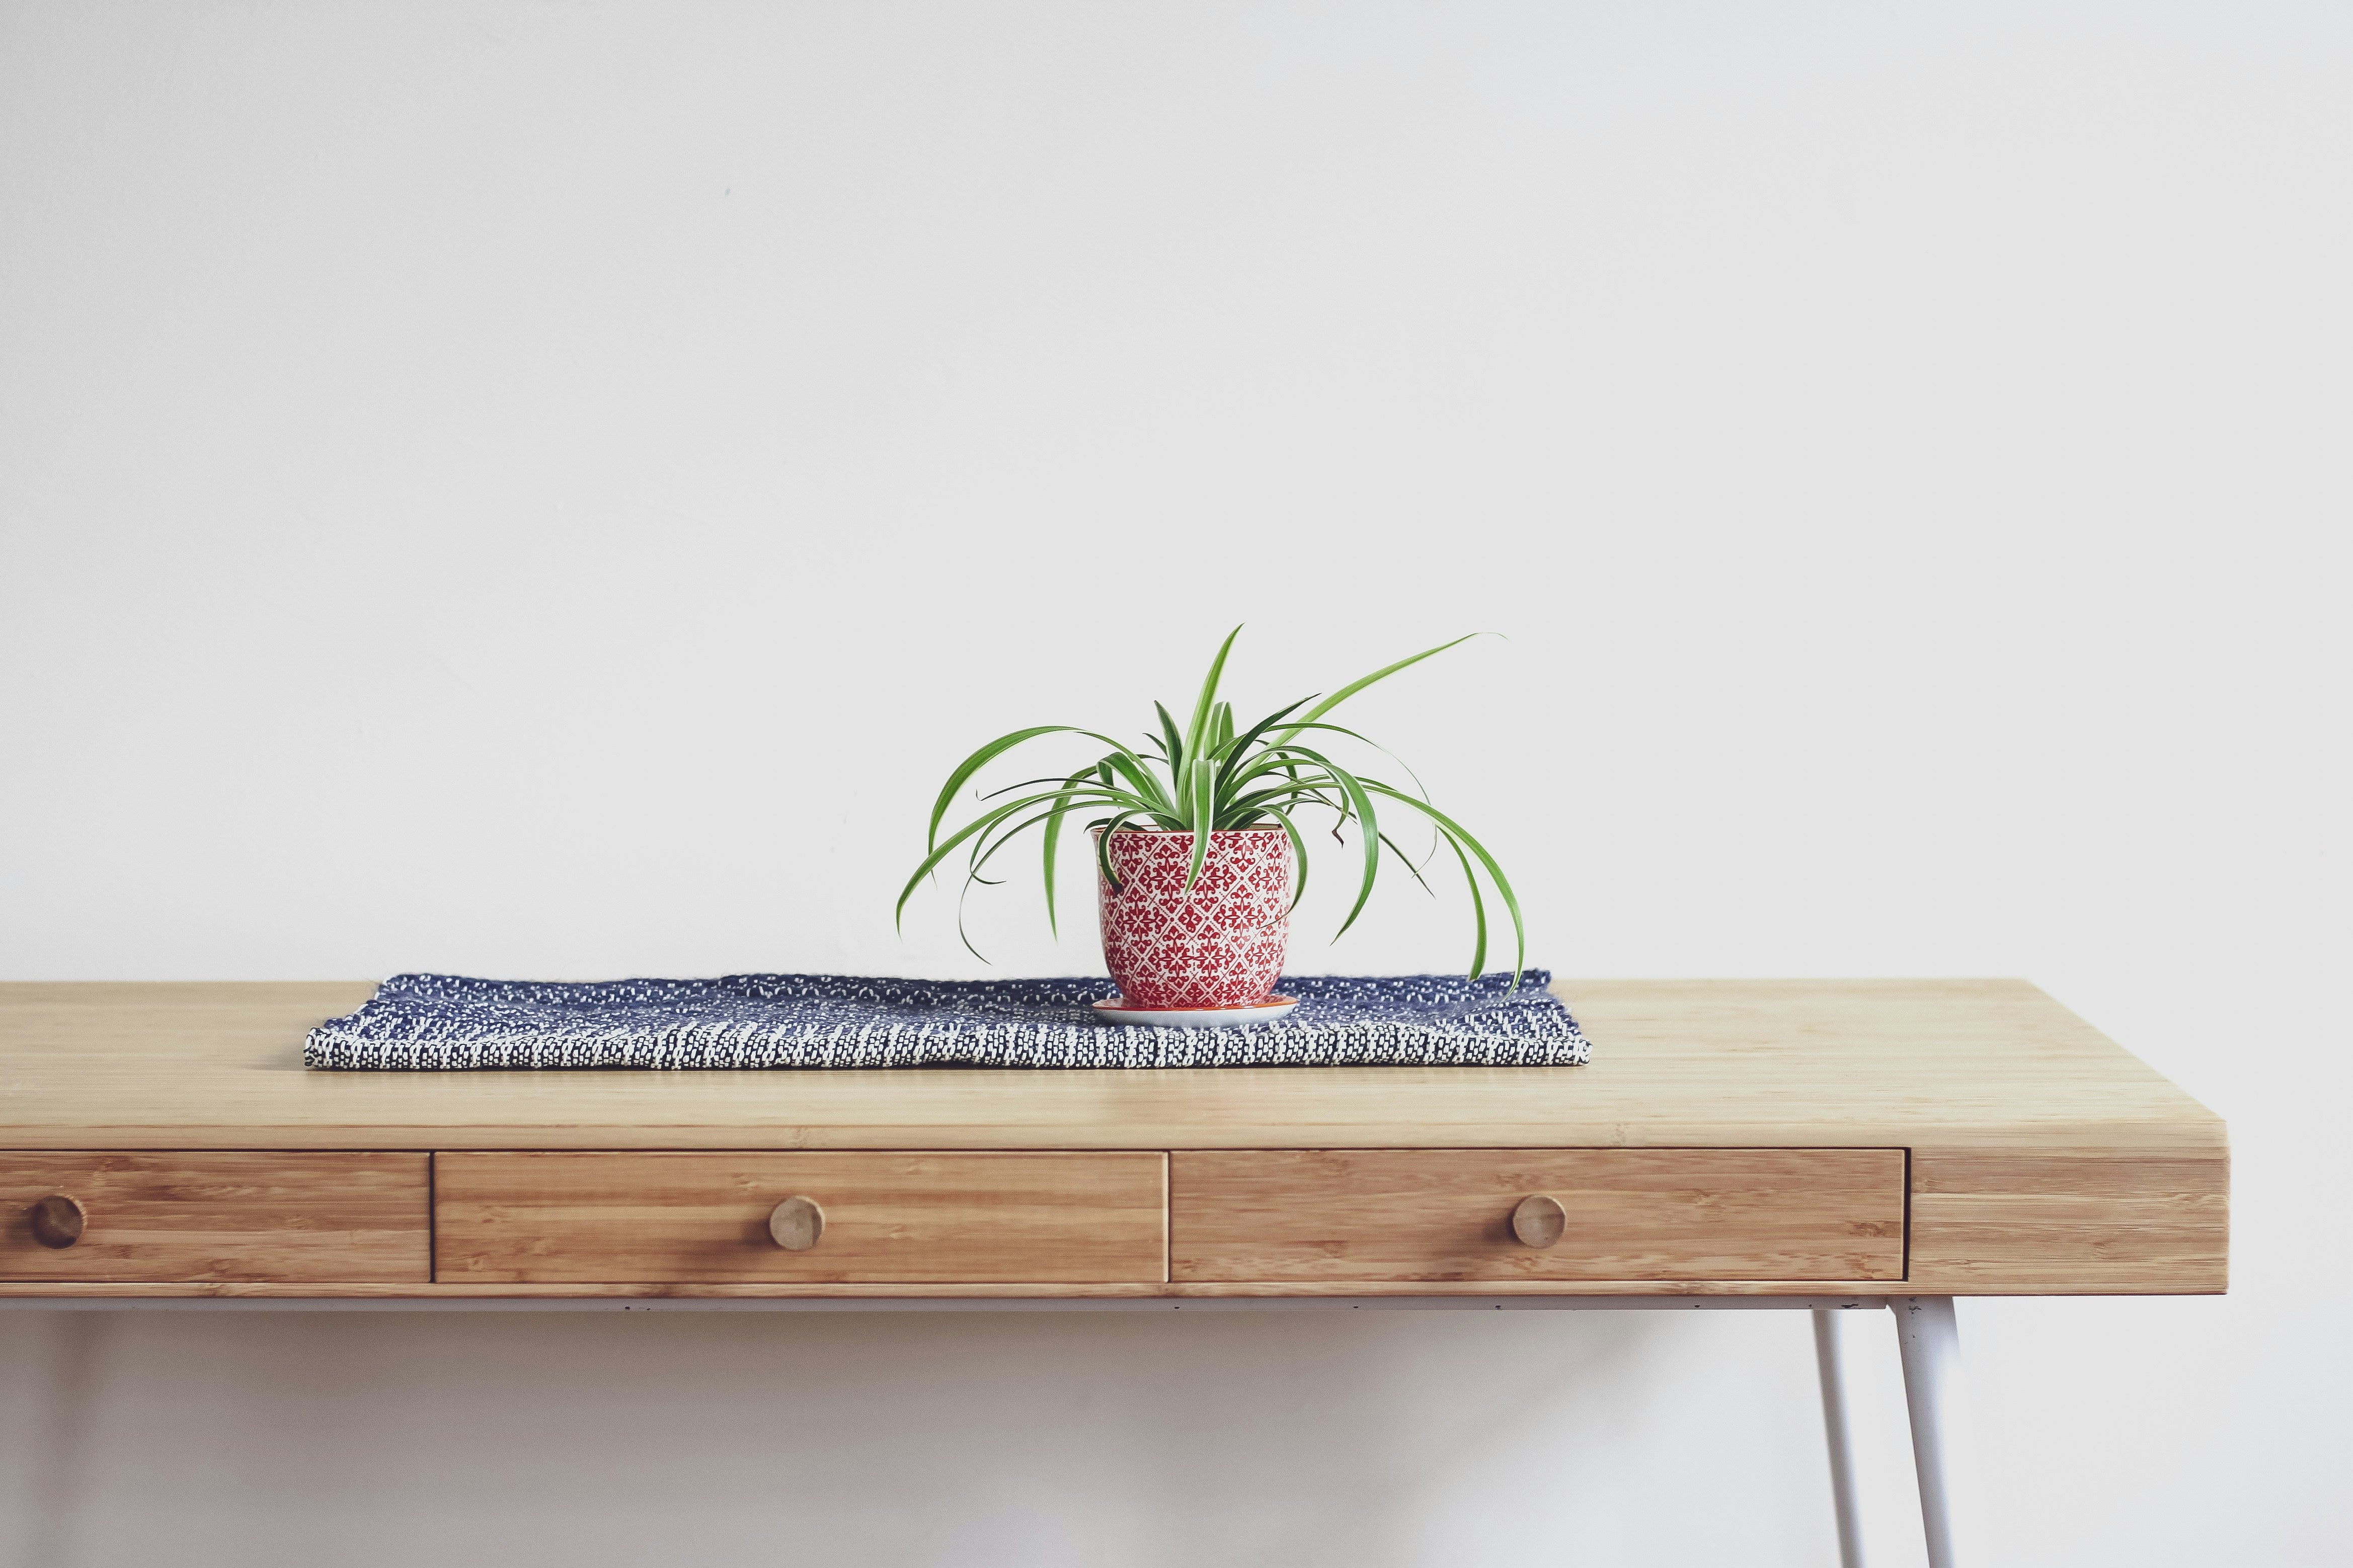 Table with a plant